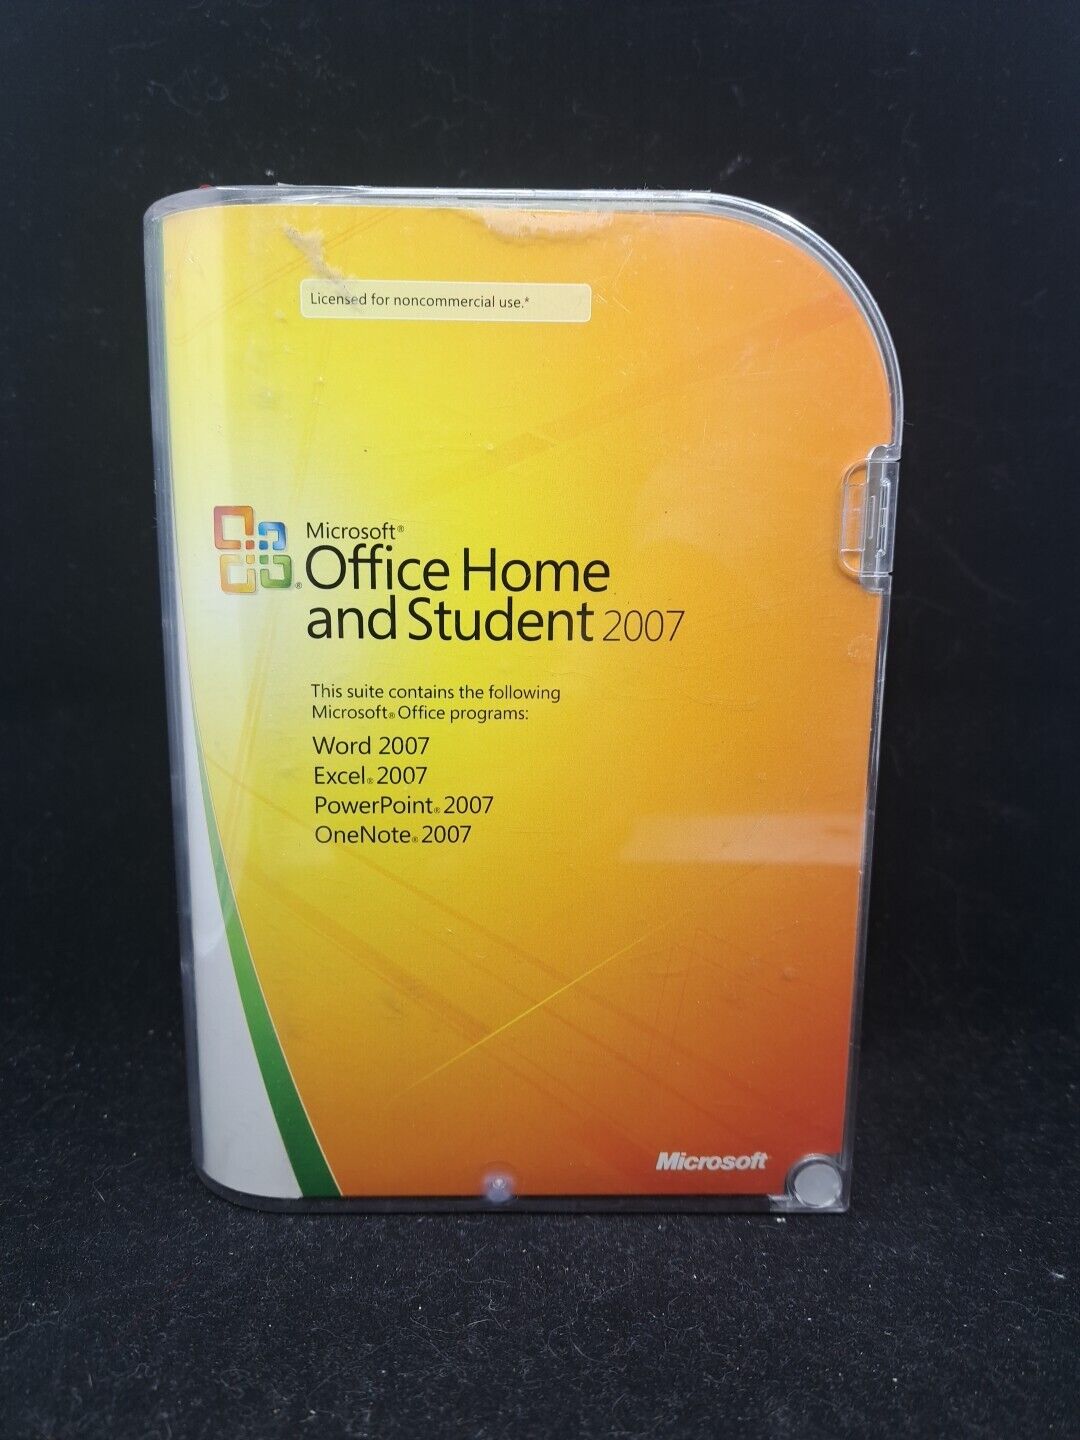 Microsoft Office Home and Student 2007 (79G-00007) w/ key Tested